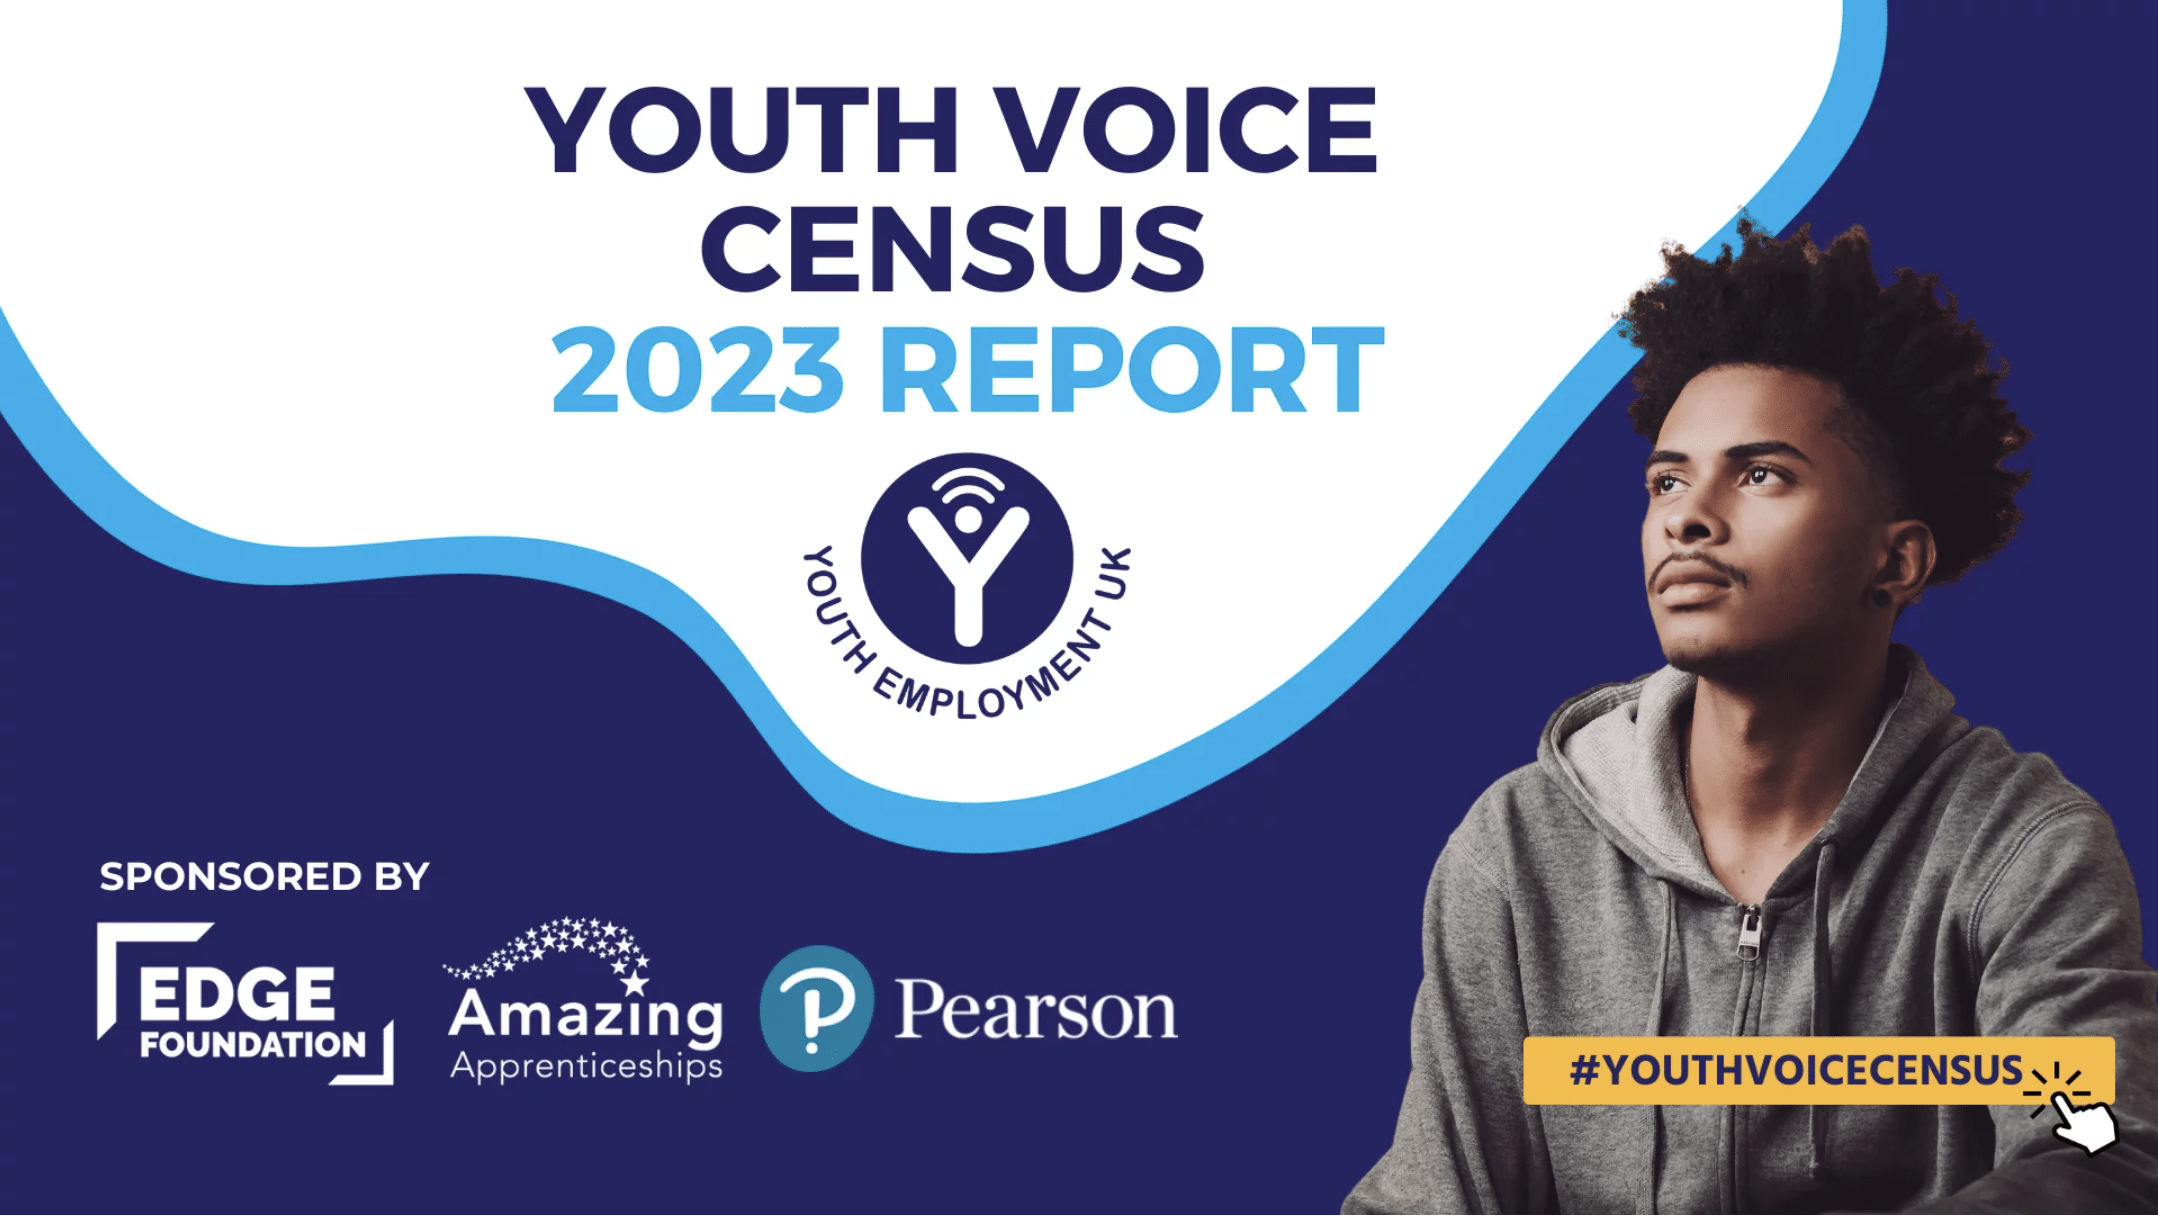 Image of a young person with the words "Youth Voice Census 2023 Report".